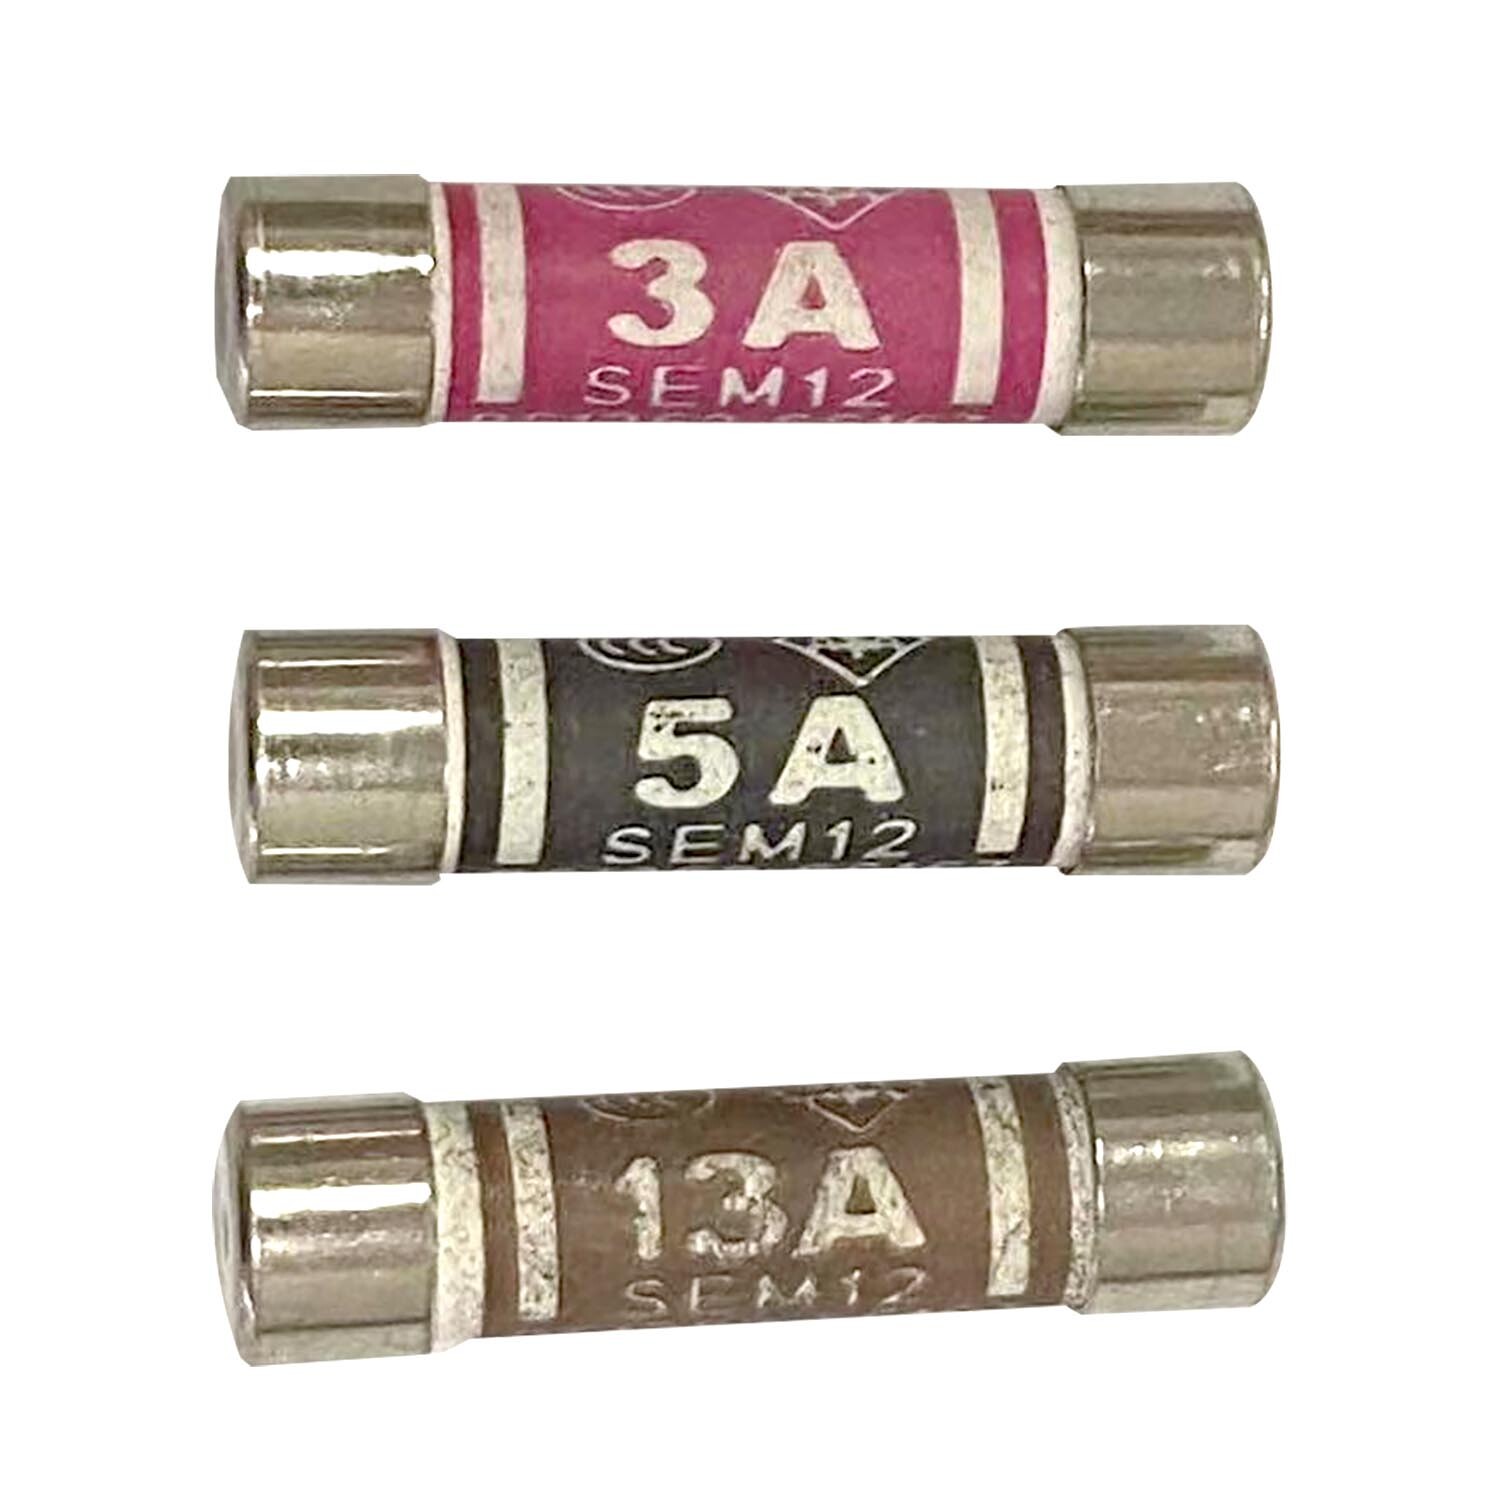 Mixed Amp Fuses 10 Pack Image